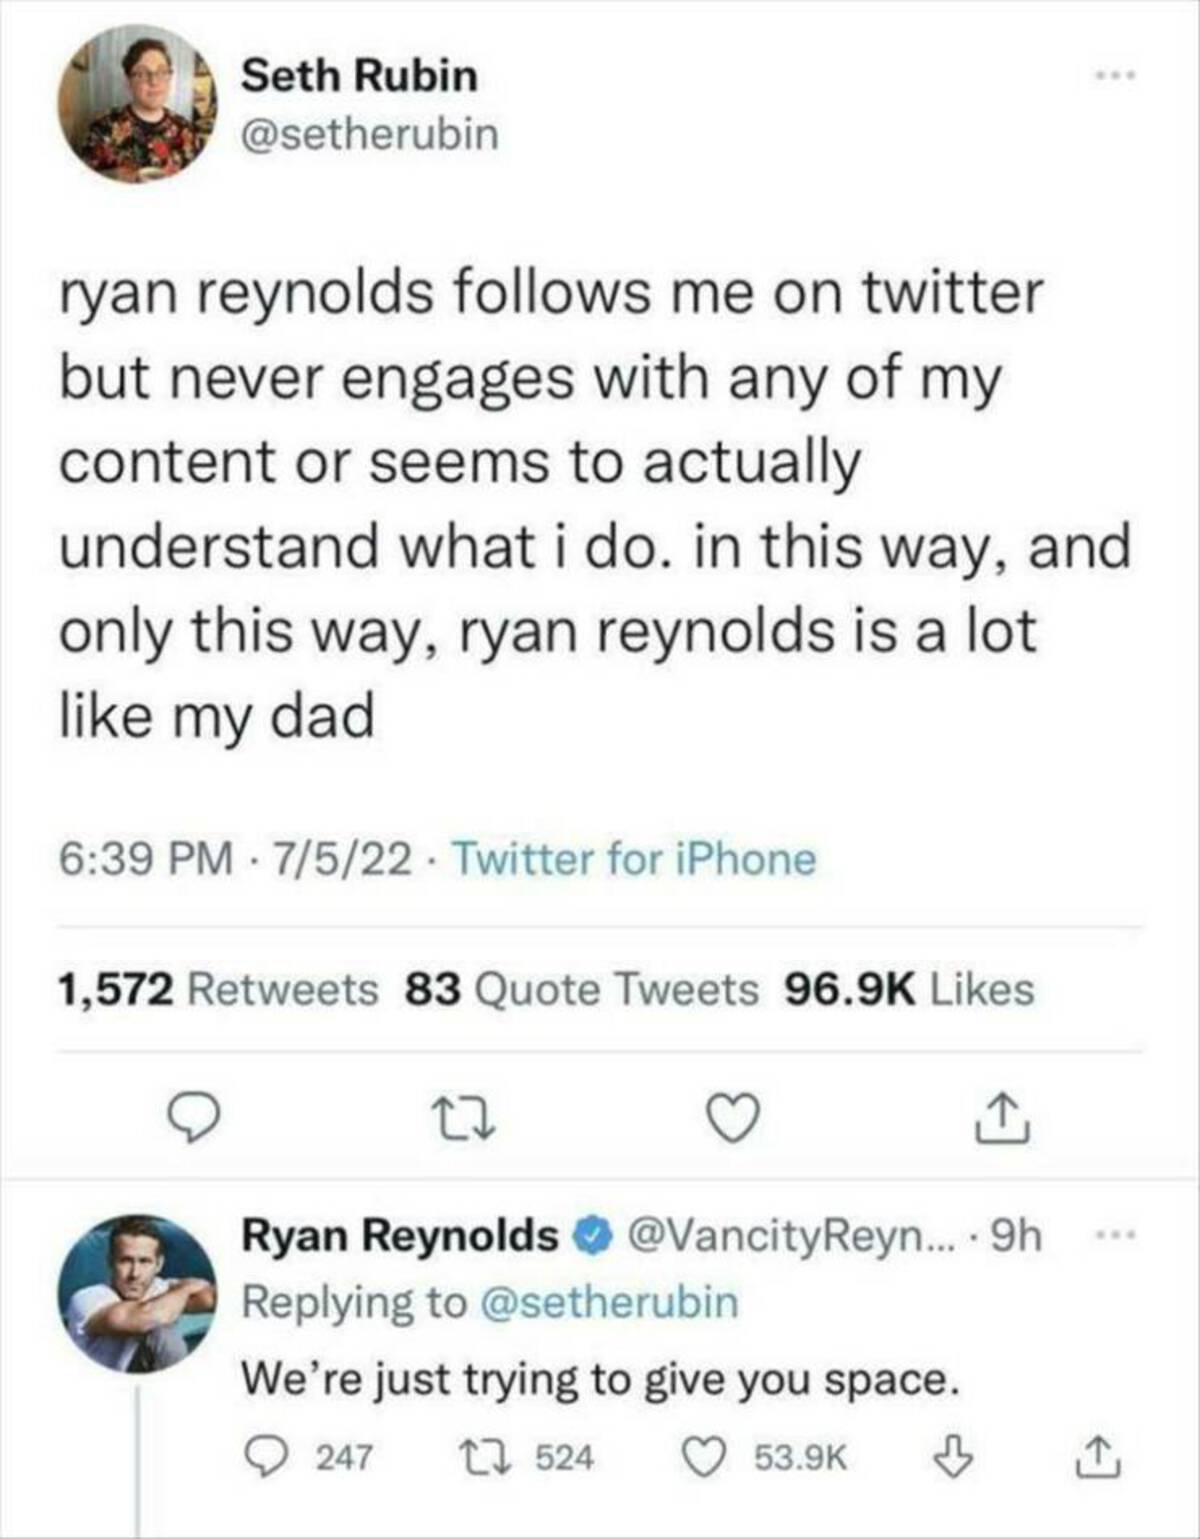 screenshot - Seth Rubin ryan reynolds s me on twitter but never engages with any of my content or seems to actually understand what i do. in this way, and only this way, ryan reynolds is a lot my dad 7522 Twitter for iPhone 1,572 83 Quote Tweets Ryan Reyn